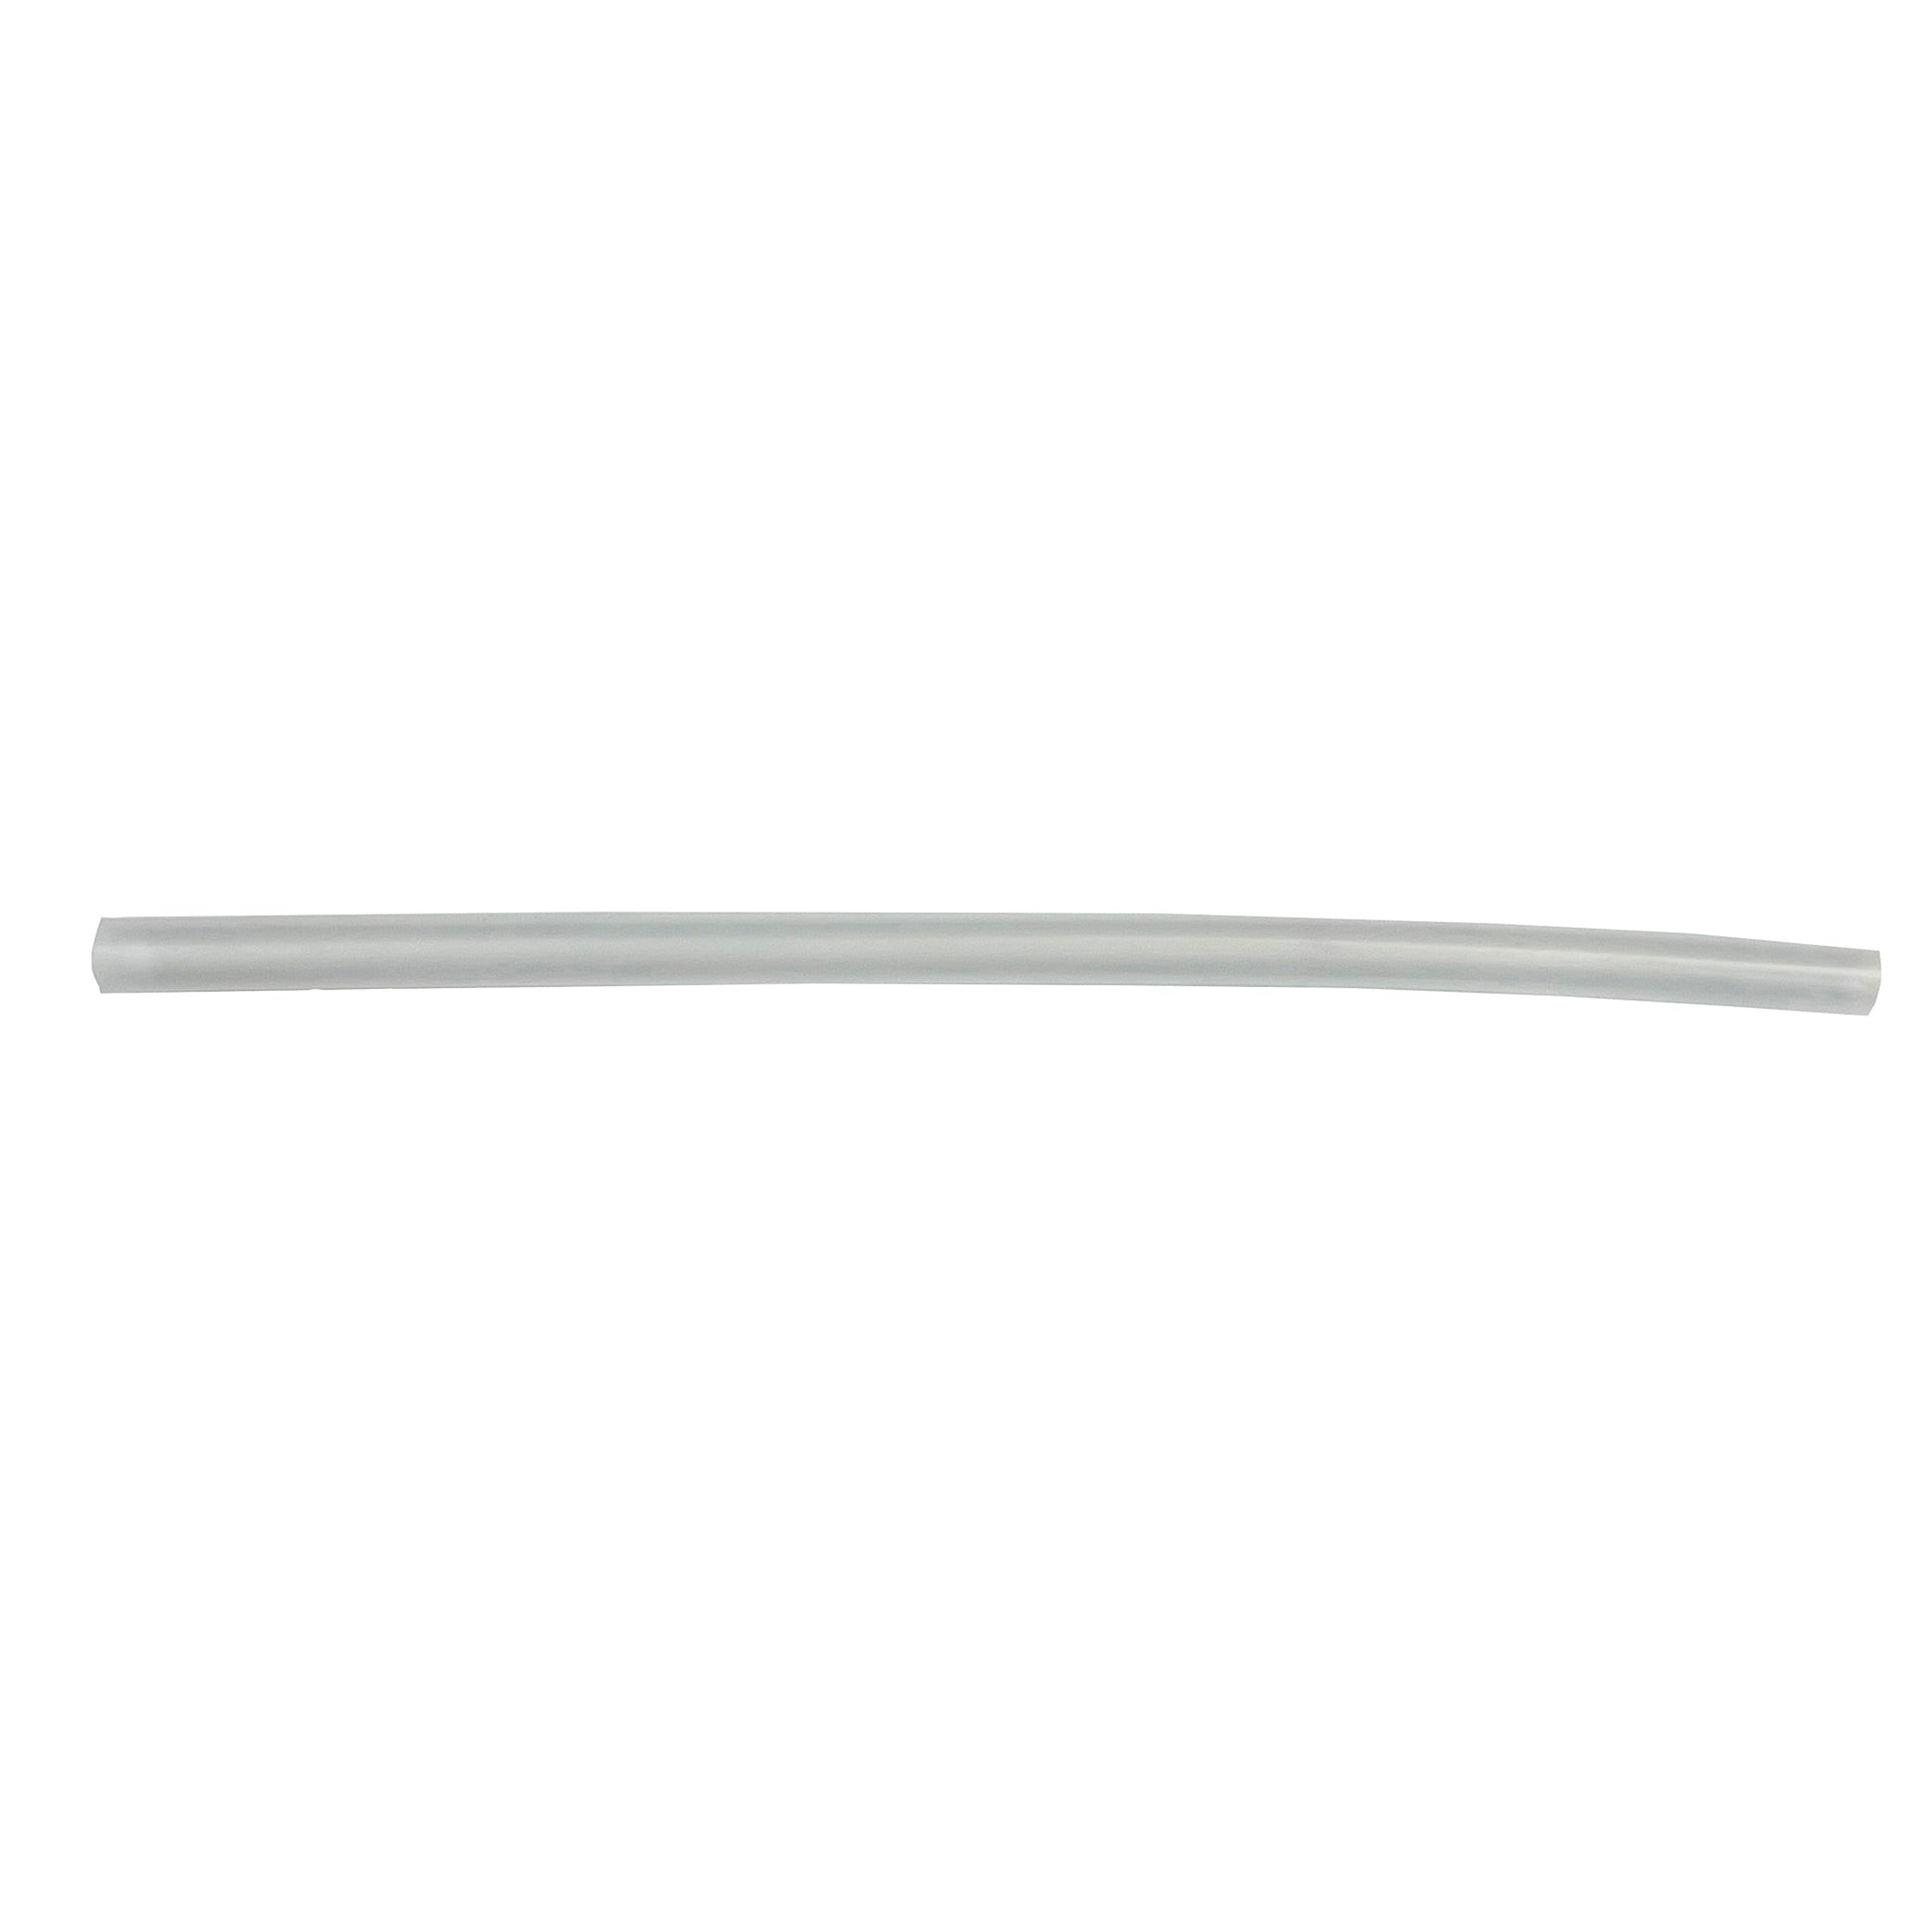 Flexible Thin Single Wall Non-Adhesive Heat Shrink Tubing 2:1 Clear 3/16" ID - 12" Inch 10 Pack